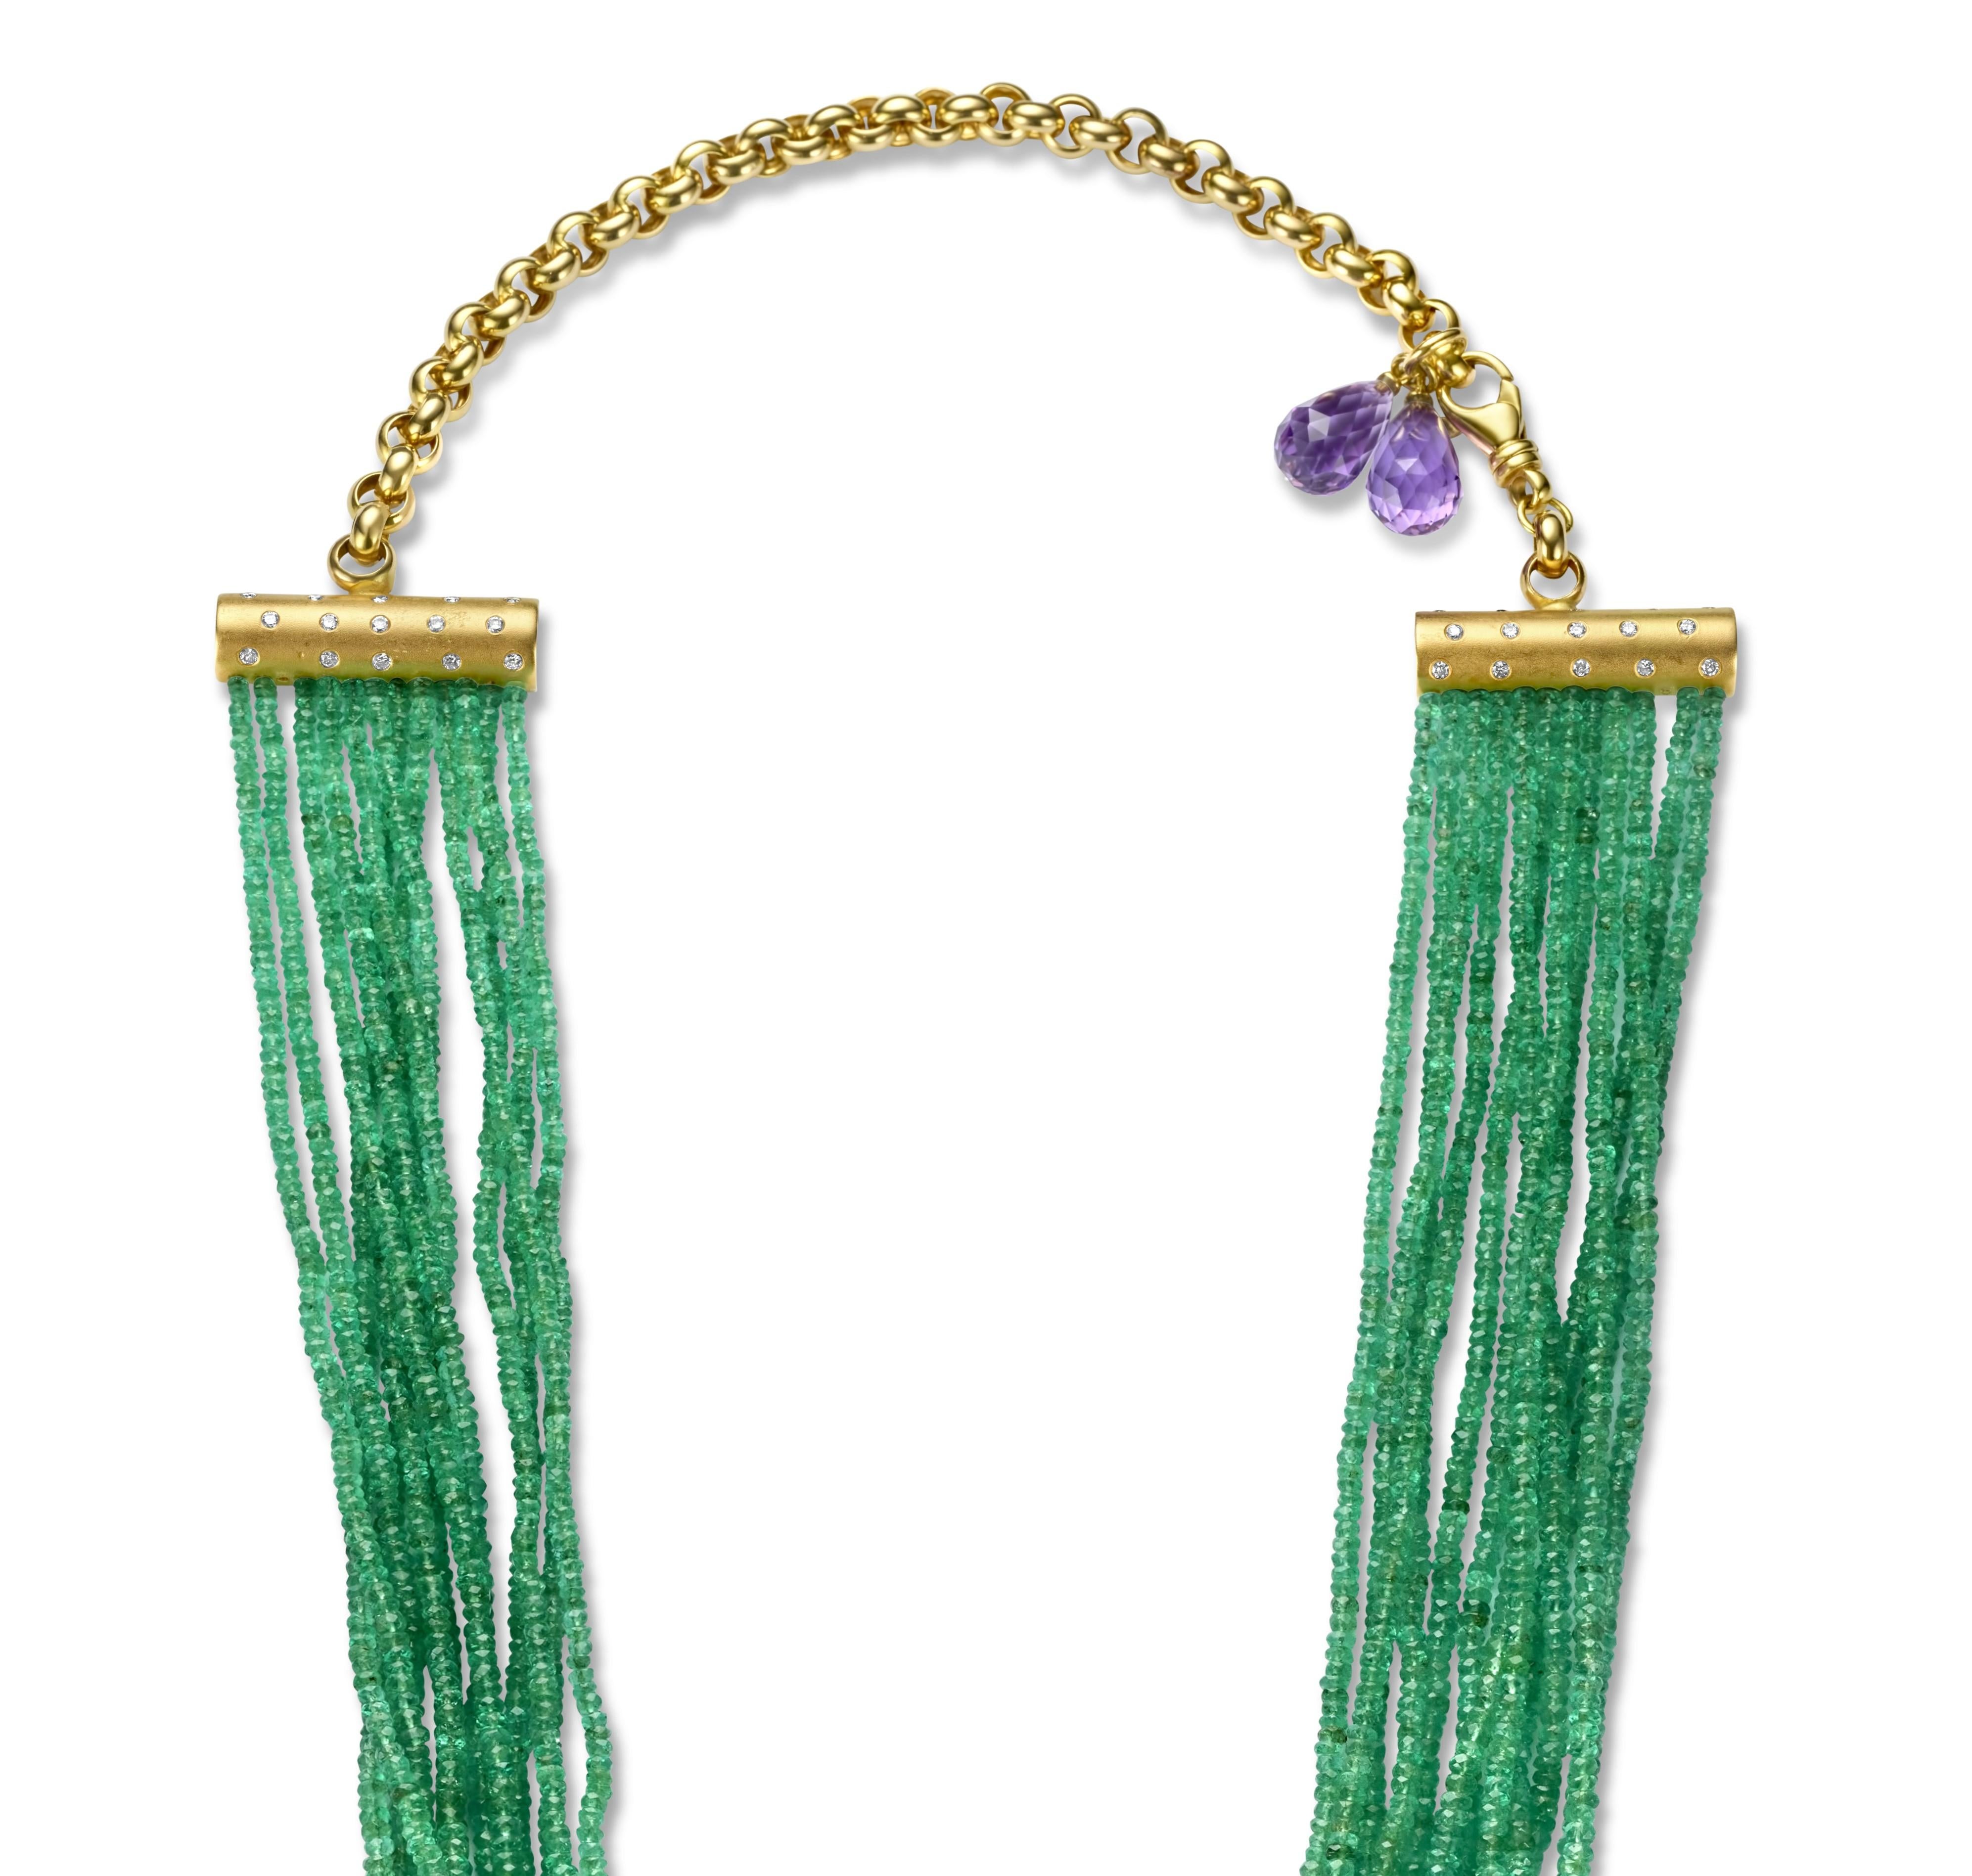 Stunning Multi Strand Necklace 450 ct Columbia Faceted Emeralds CGL Certified & Amethyst Briolets on lock.

Emeralds: 450 Carats  Intense green Columbia Emeralds faceted gemstone

Diamonds: 30 brilliant cut diamonds together approx. 0.6 ct.